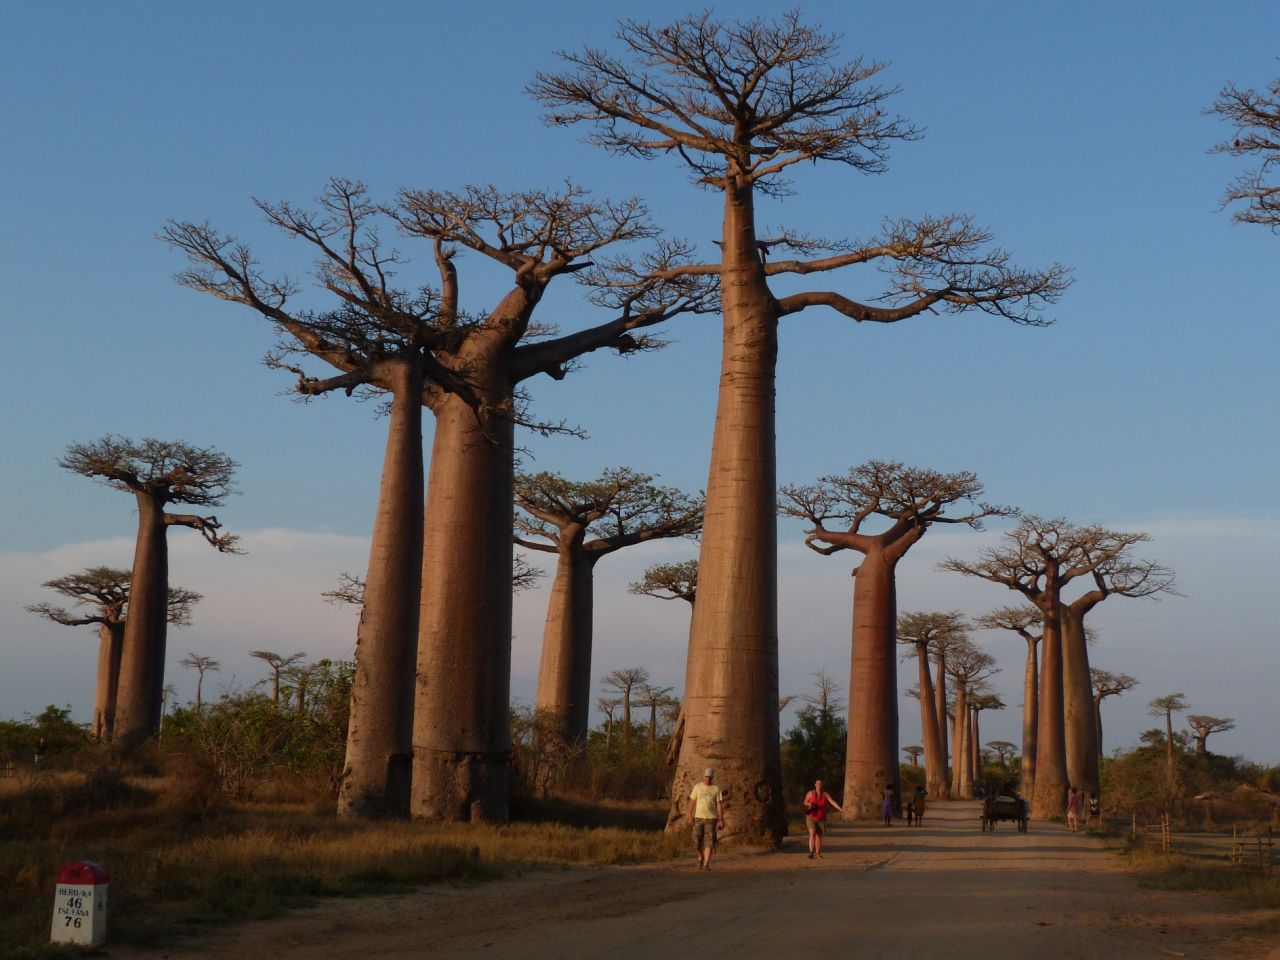 The "Avenue of the Baobabs" was designated as a protected zone in 2007 after a sugar factory flooded the area with water for several years and farmers started cultivating rice on the lands, causing ancestral baobab trees to rot and fall. The site was restored through conservation efforts.